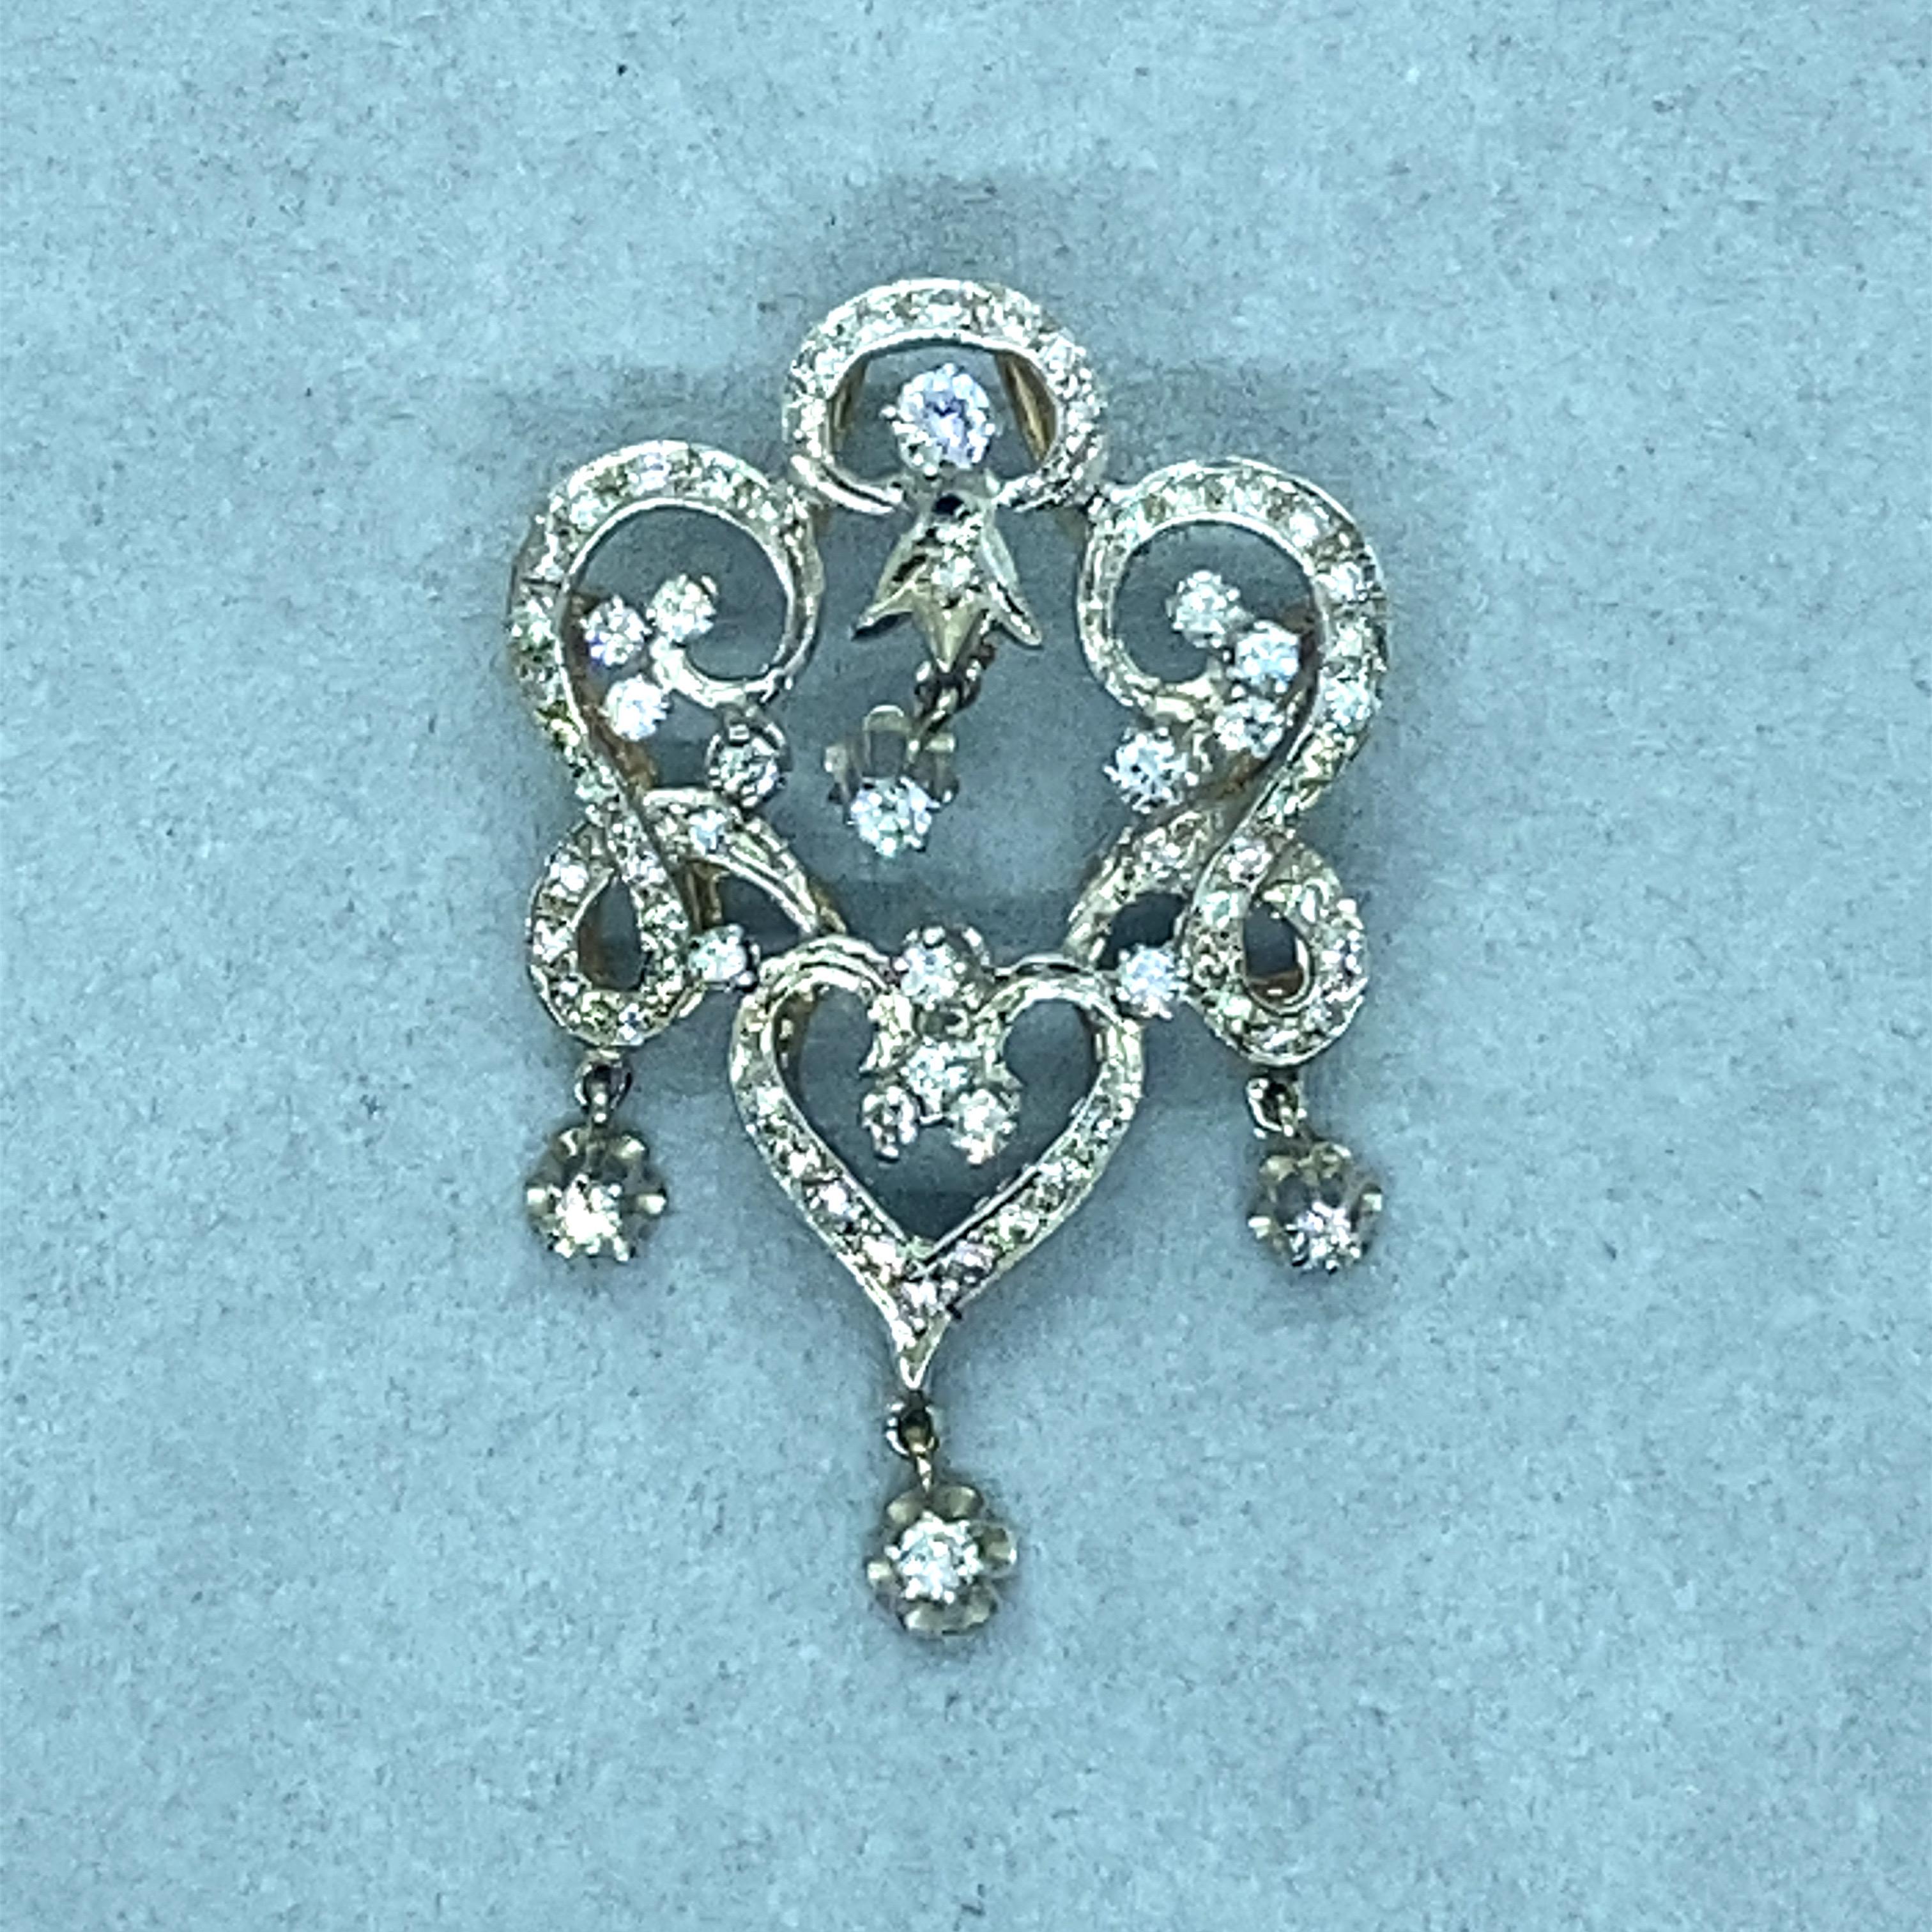 Women's Vintage 1950’s Edwardian Reproduction Diamond Chandelier Brooch and Pendant For Sale